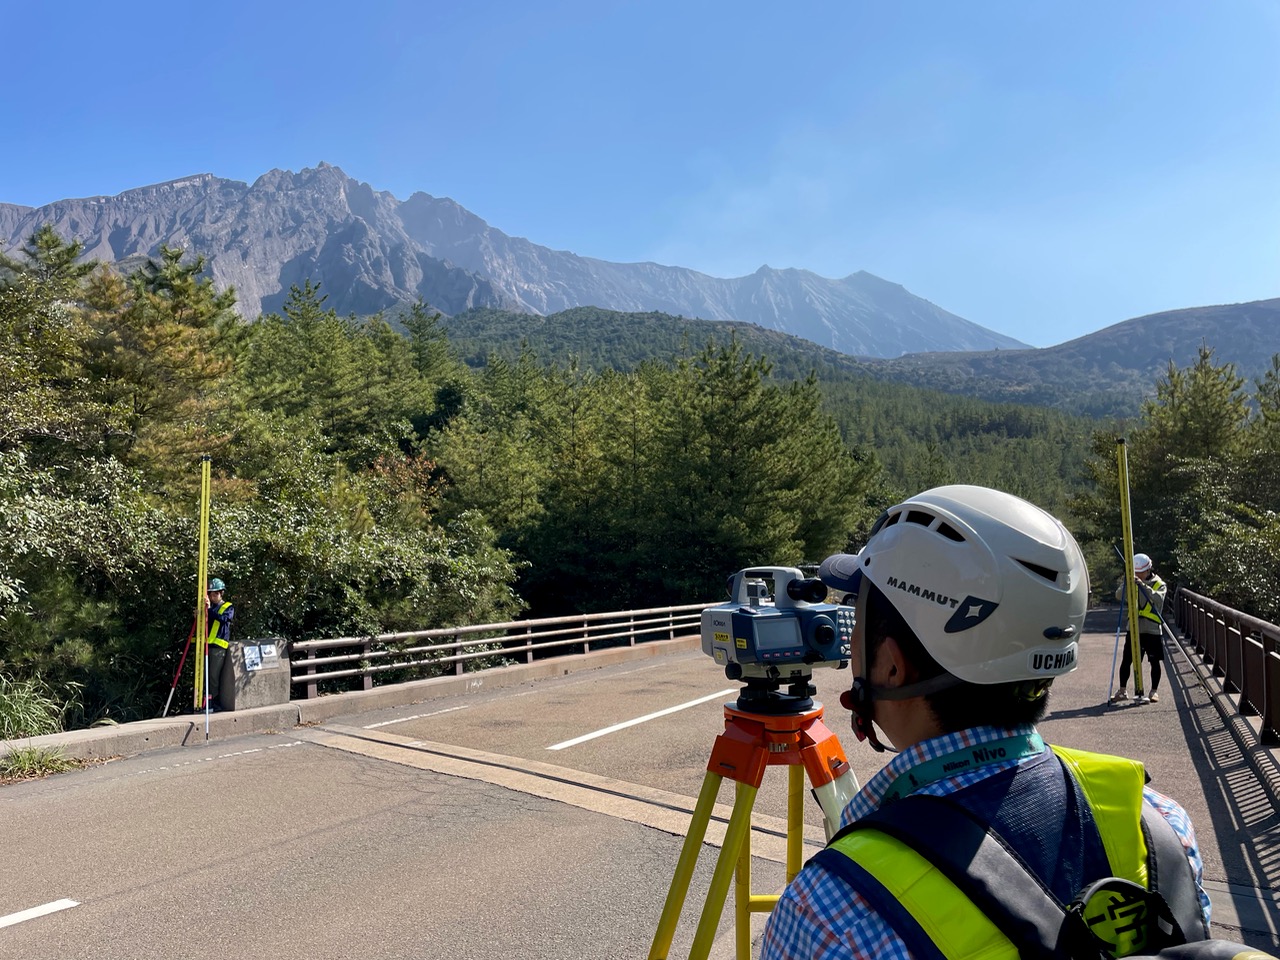 Precise leveling survey of Sakurajima volcano was carried out